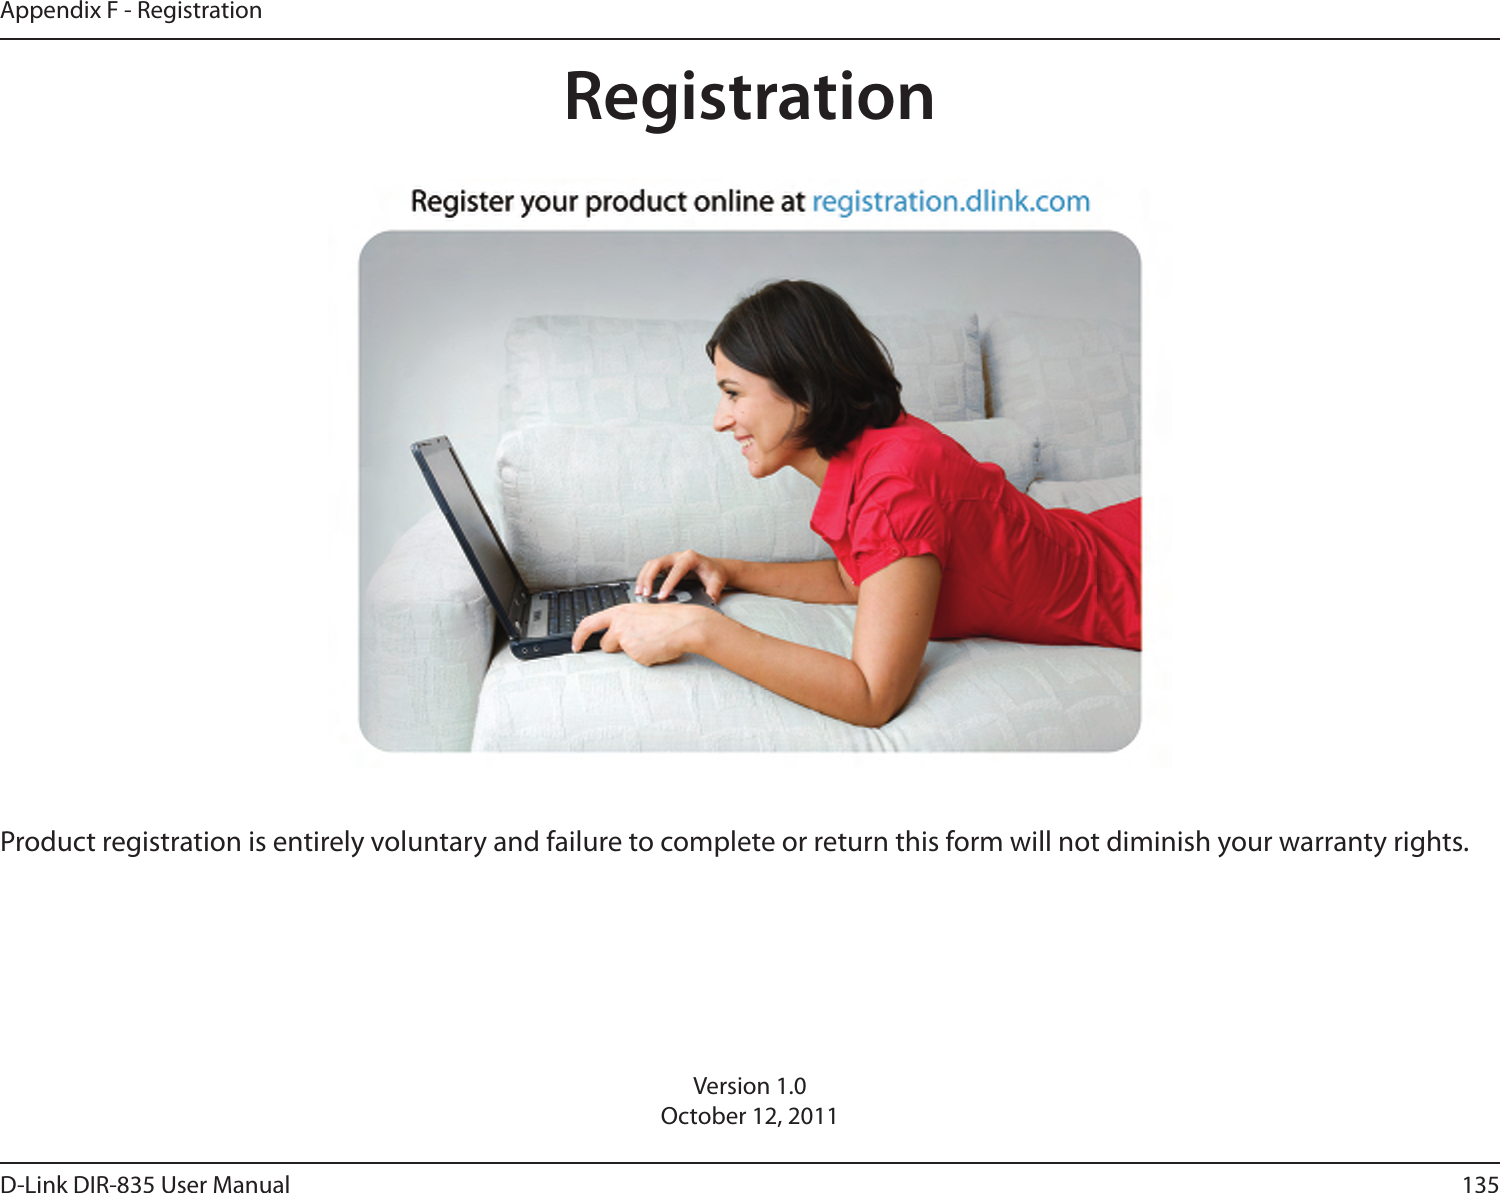 135D-Link DIR-835 User ManualAppendix F - RegistrationVersion 1.0October 12, 2011Product registration is entirely voluntary and failure to complete or return this form will not diminish your warranty rights.Registration